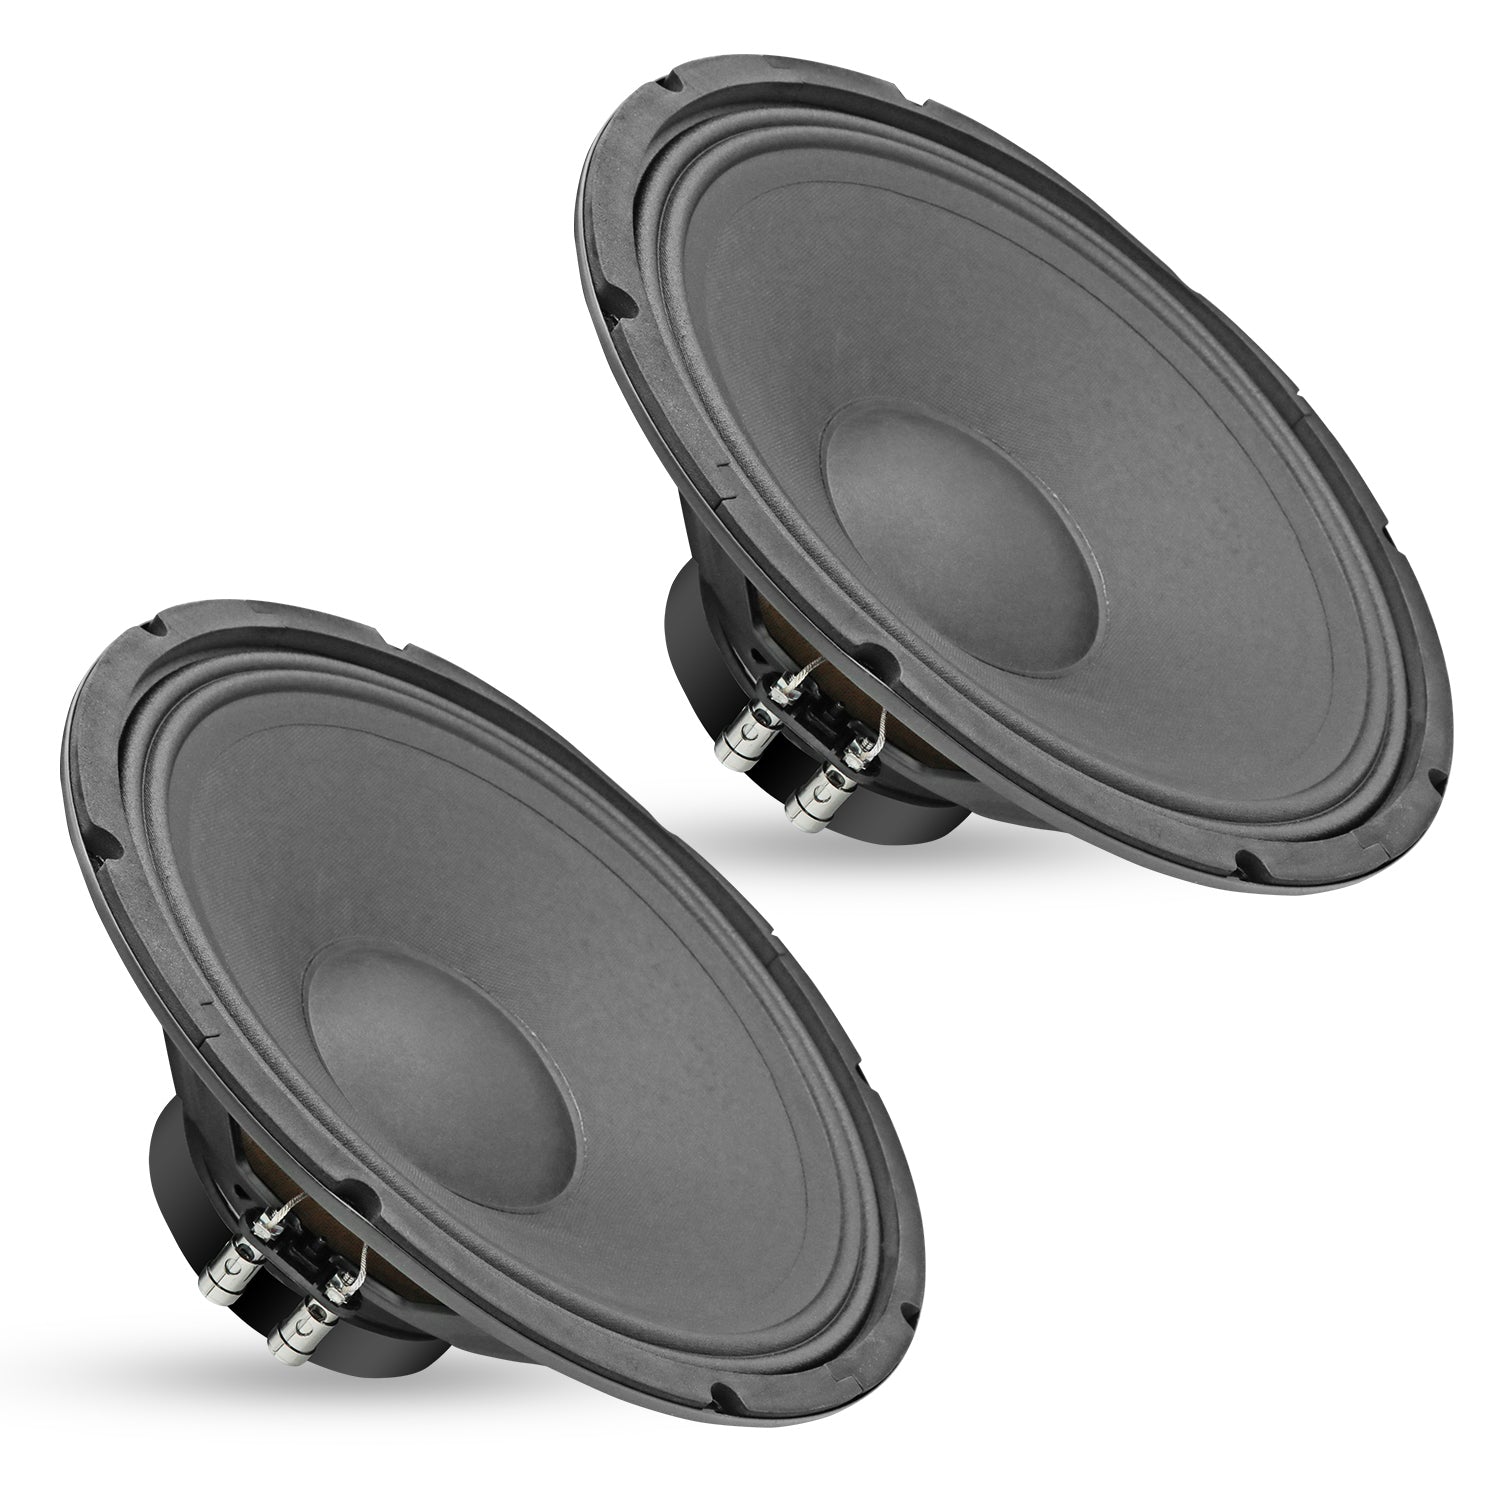 5 Core Speaker Subwoofer 12 Inch PA DJ Subs 200W Max Pro Audio 8Ohm Replacement Subwoofers